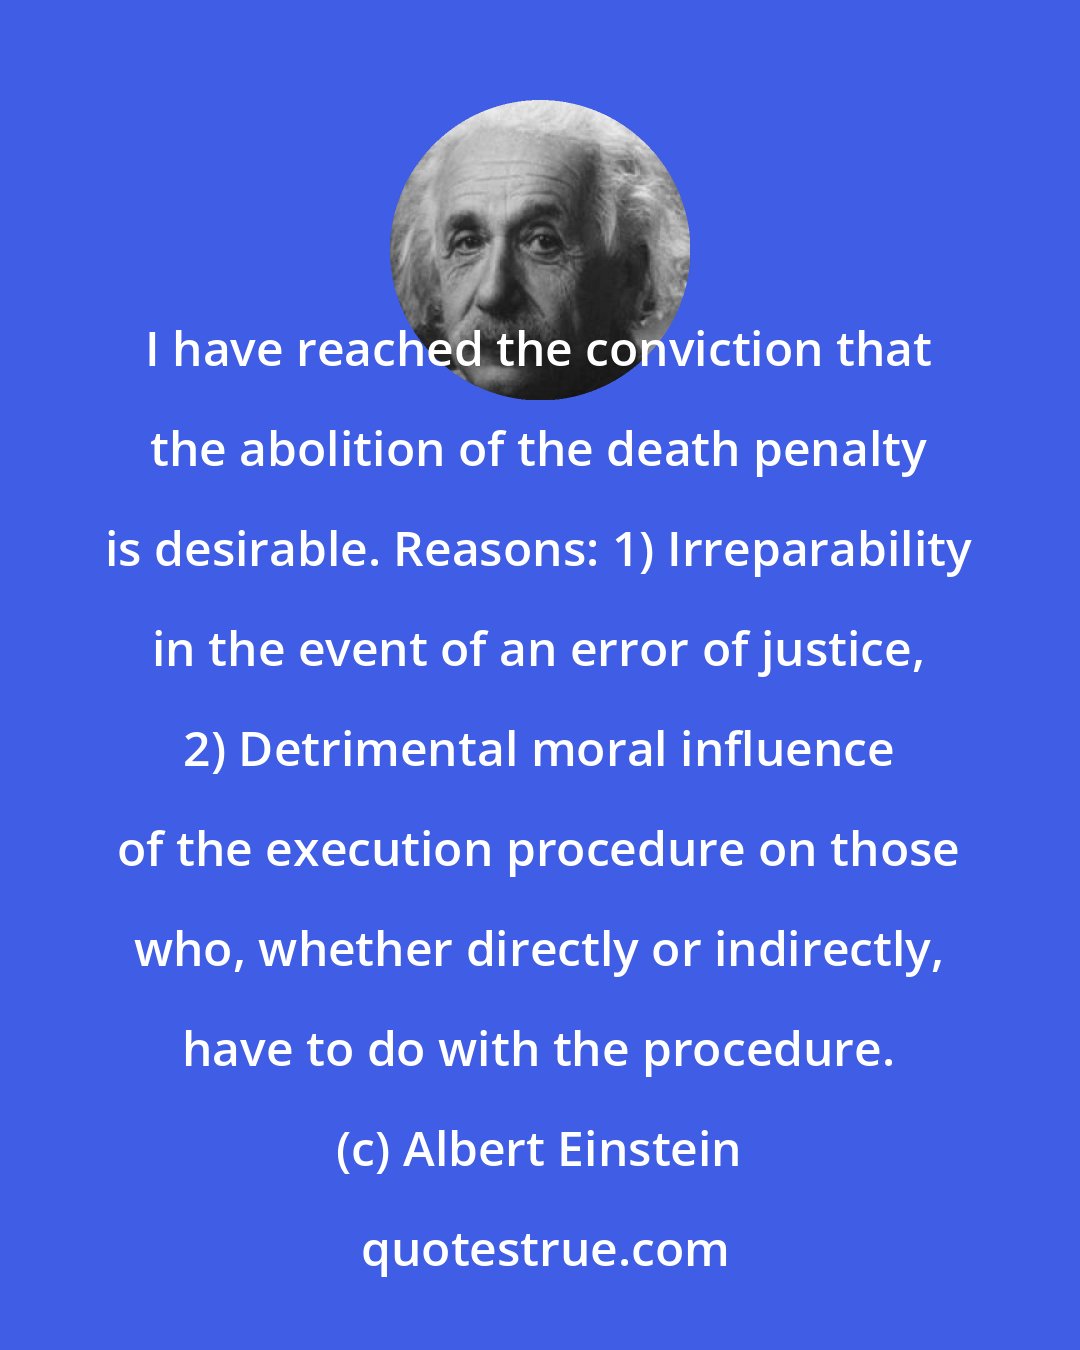 Albert Einstein: I have reached the conviction that the abolition of the death penalty is desirable. Reasons: 1) Irreparability in the event of an error of justice, 2) Detrimental moral influence of the execution procedure on those who, whether directly or indirectly, have to do with the procedure.